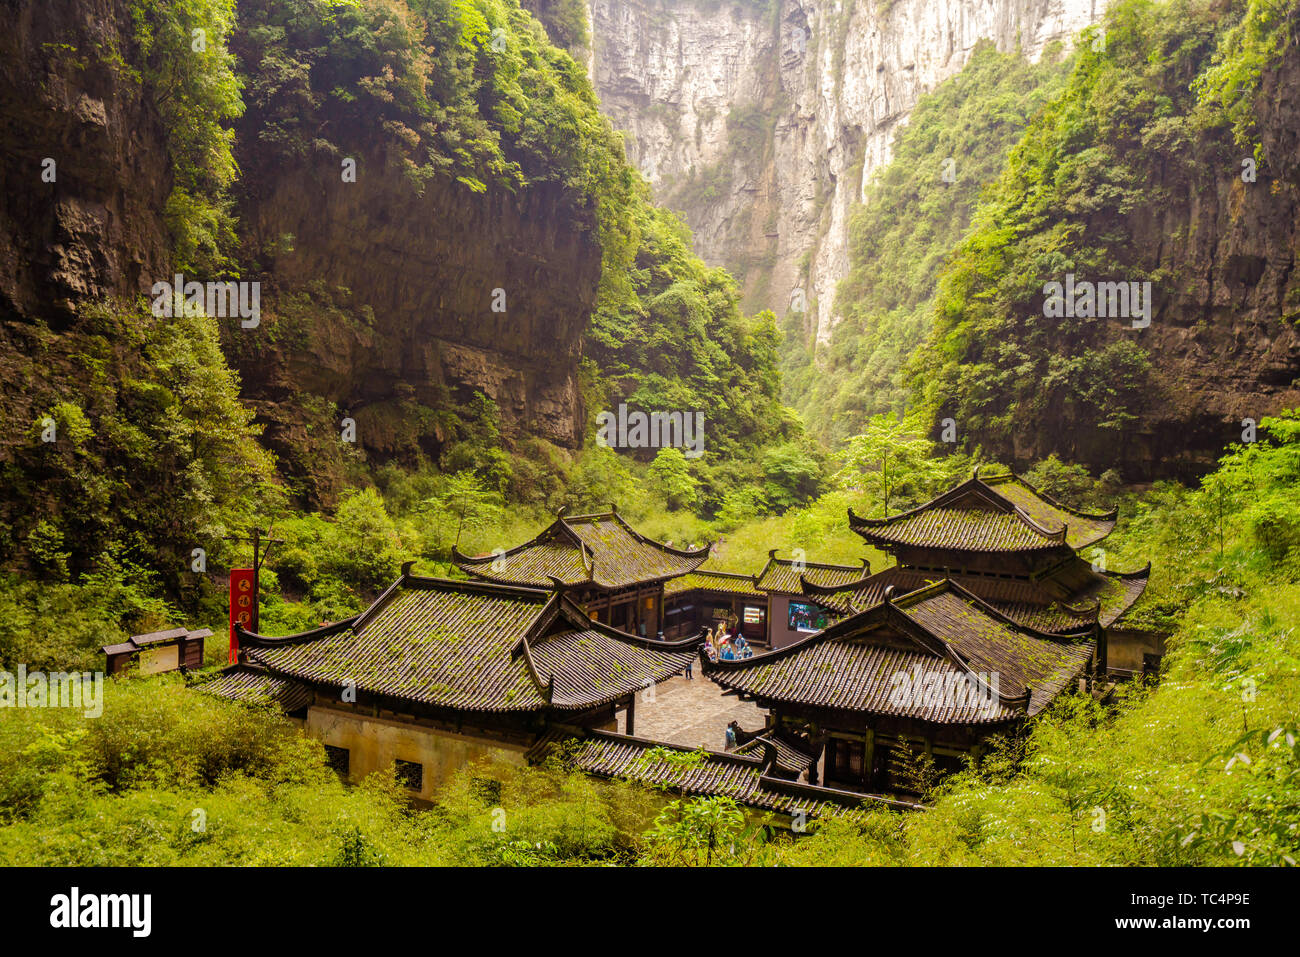 Tiankeng Sanqiao Scenic Area in Wulong County, Sichuan Province, China Stock Photo